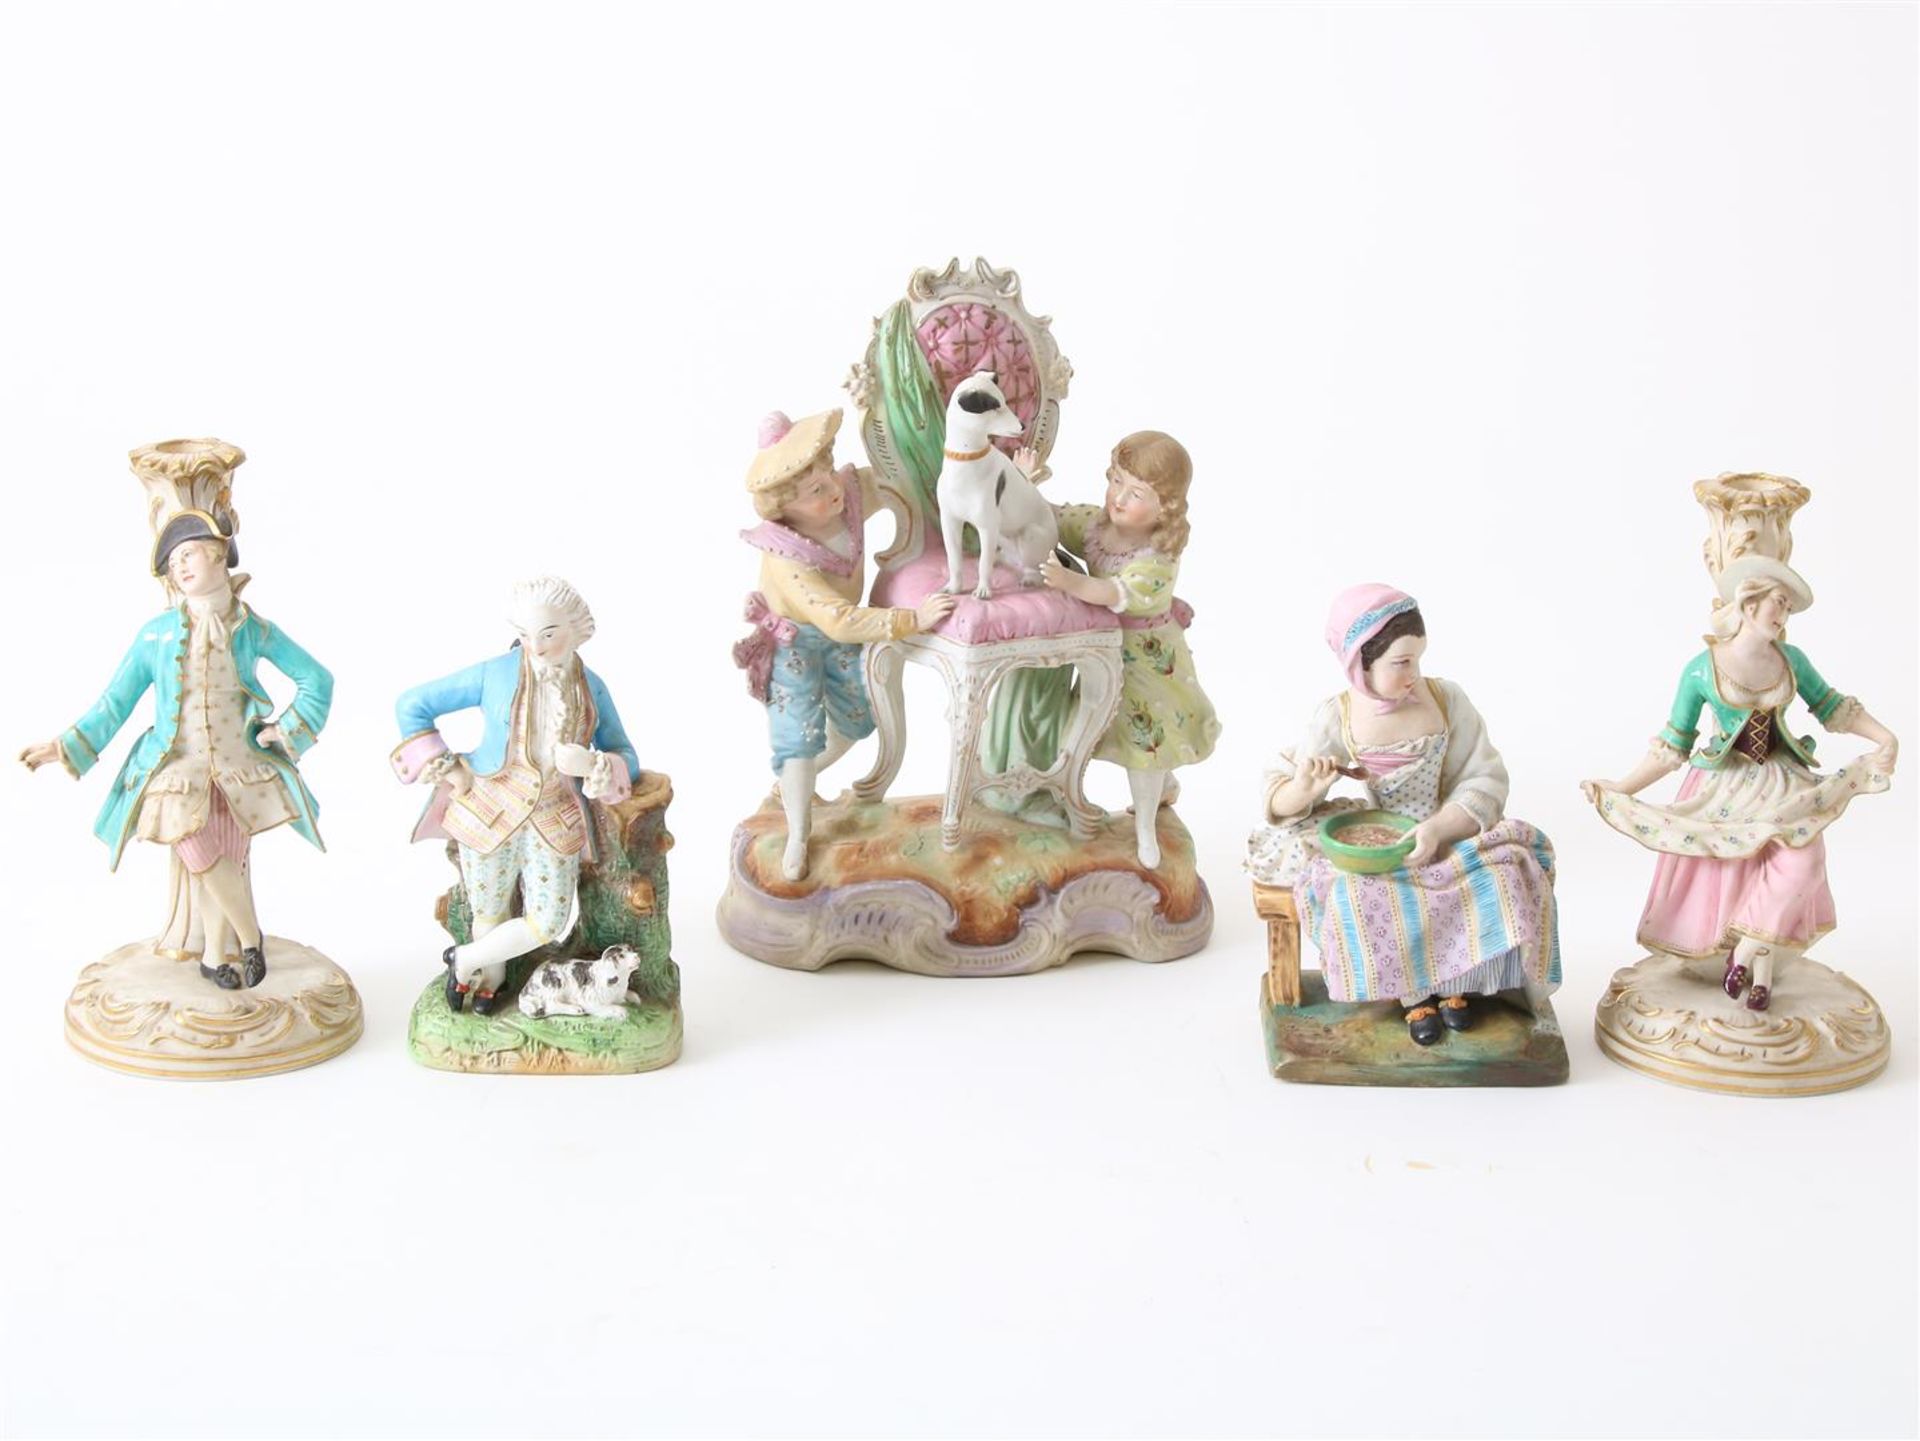 set of 5 biscuit groups of statues